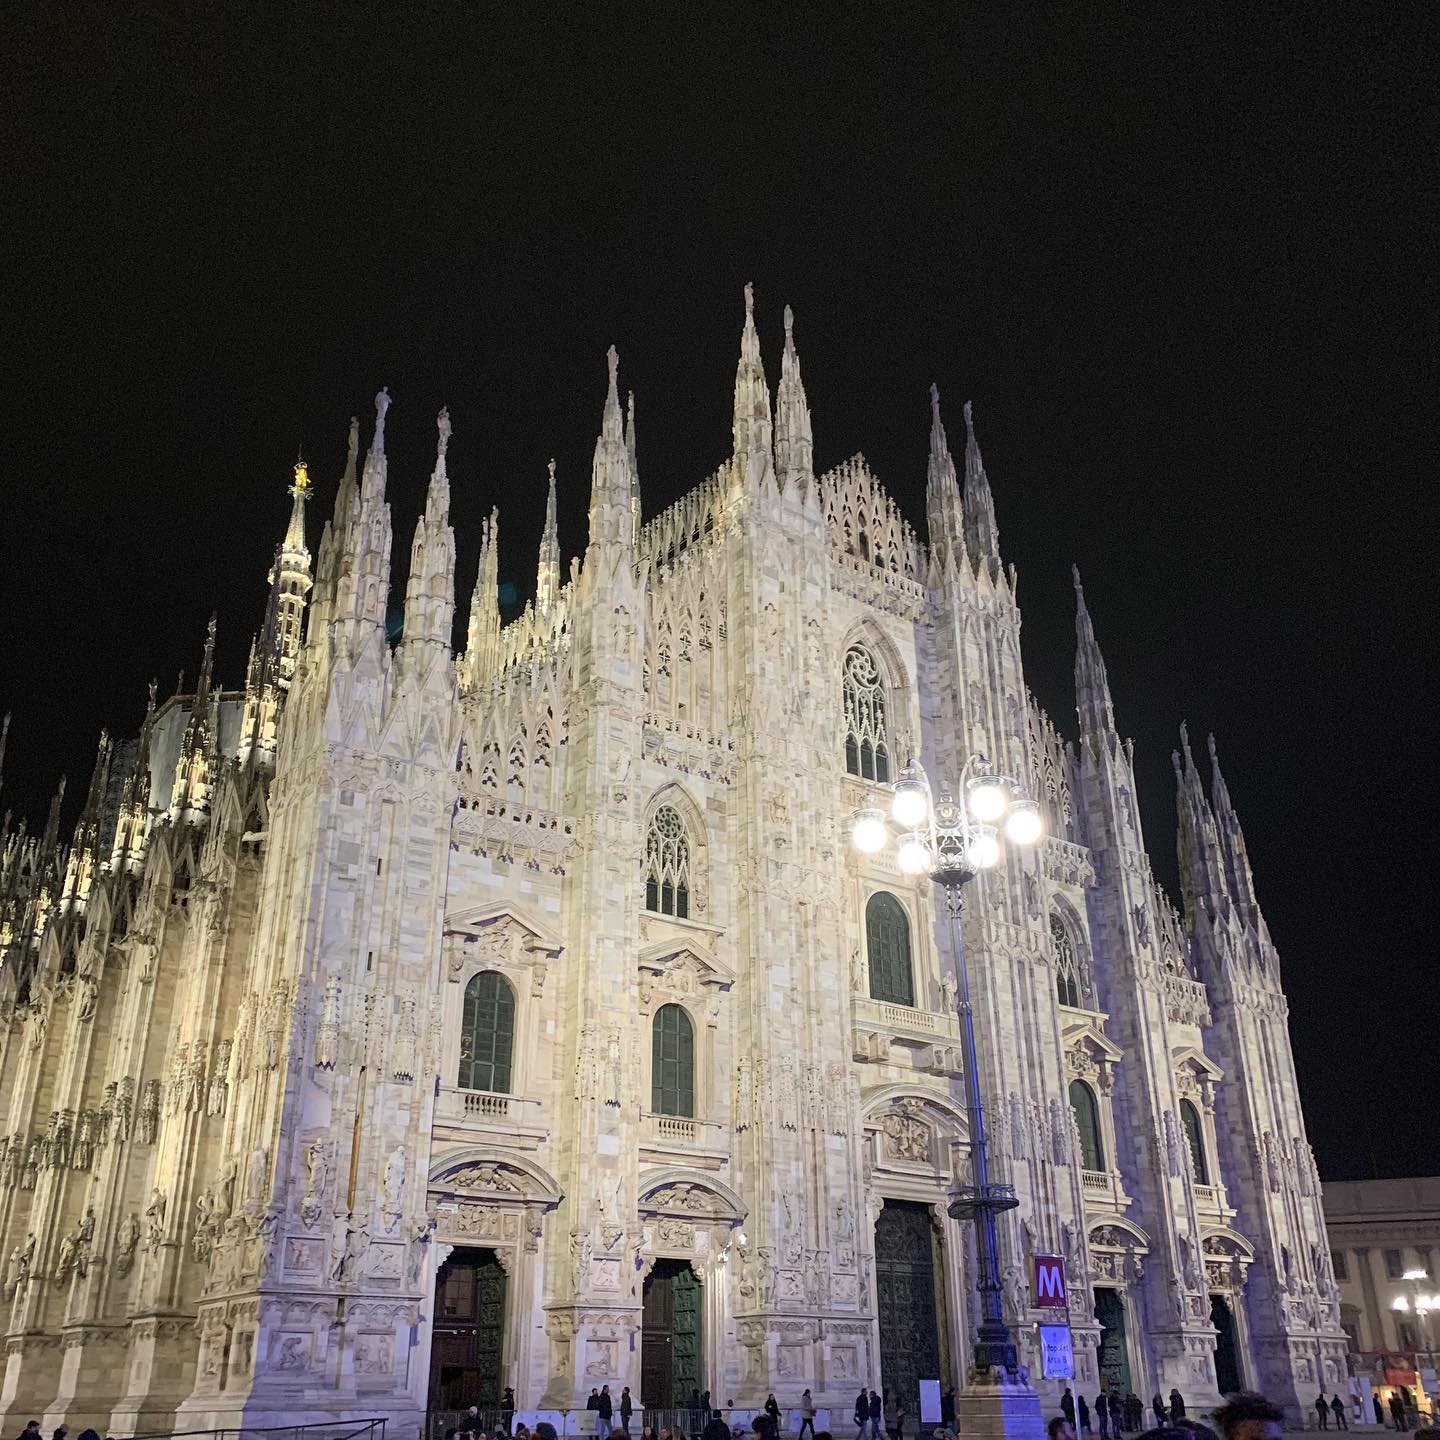 The majesty of Duomo always attracts me